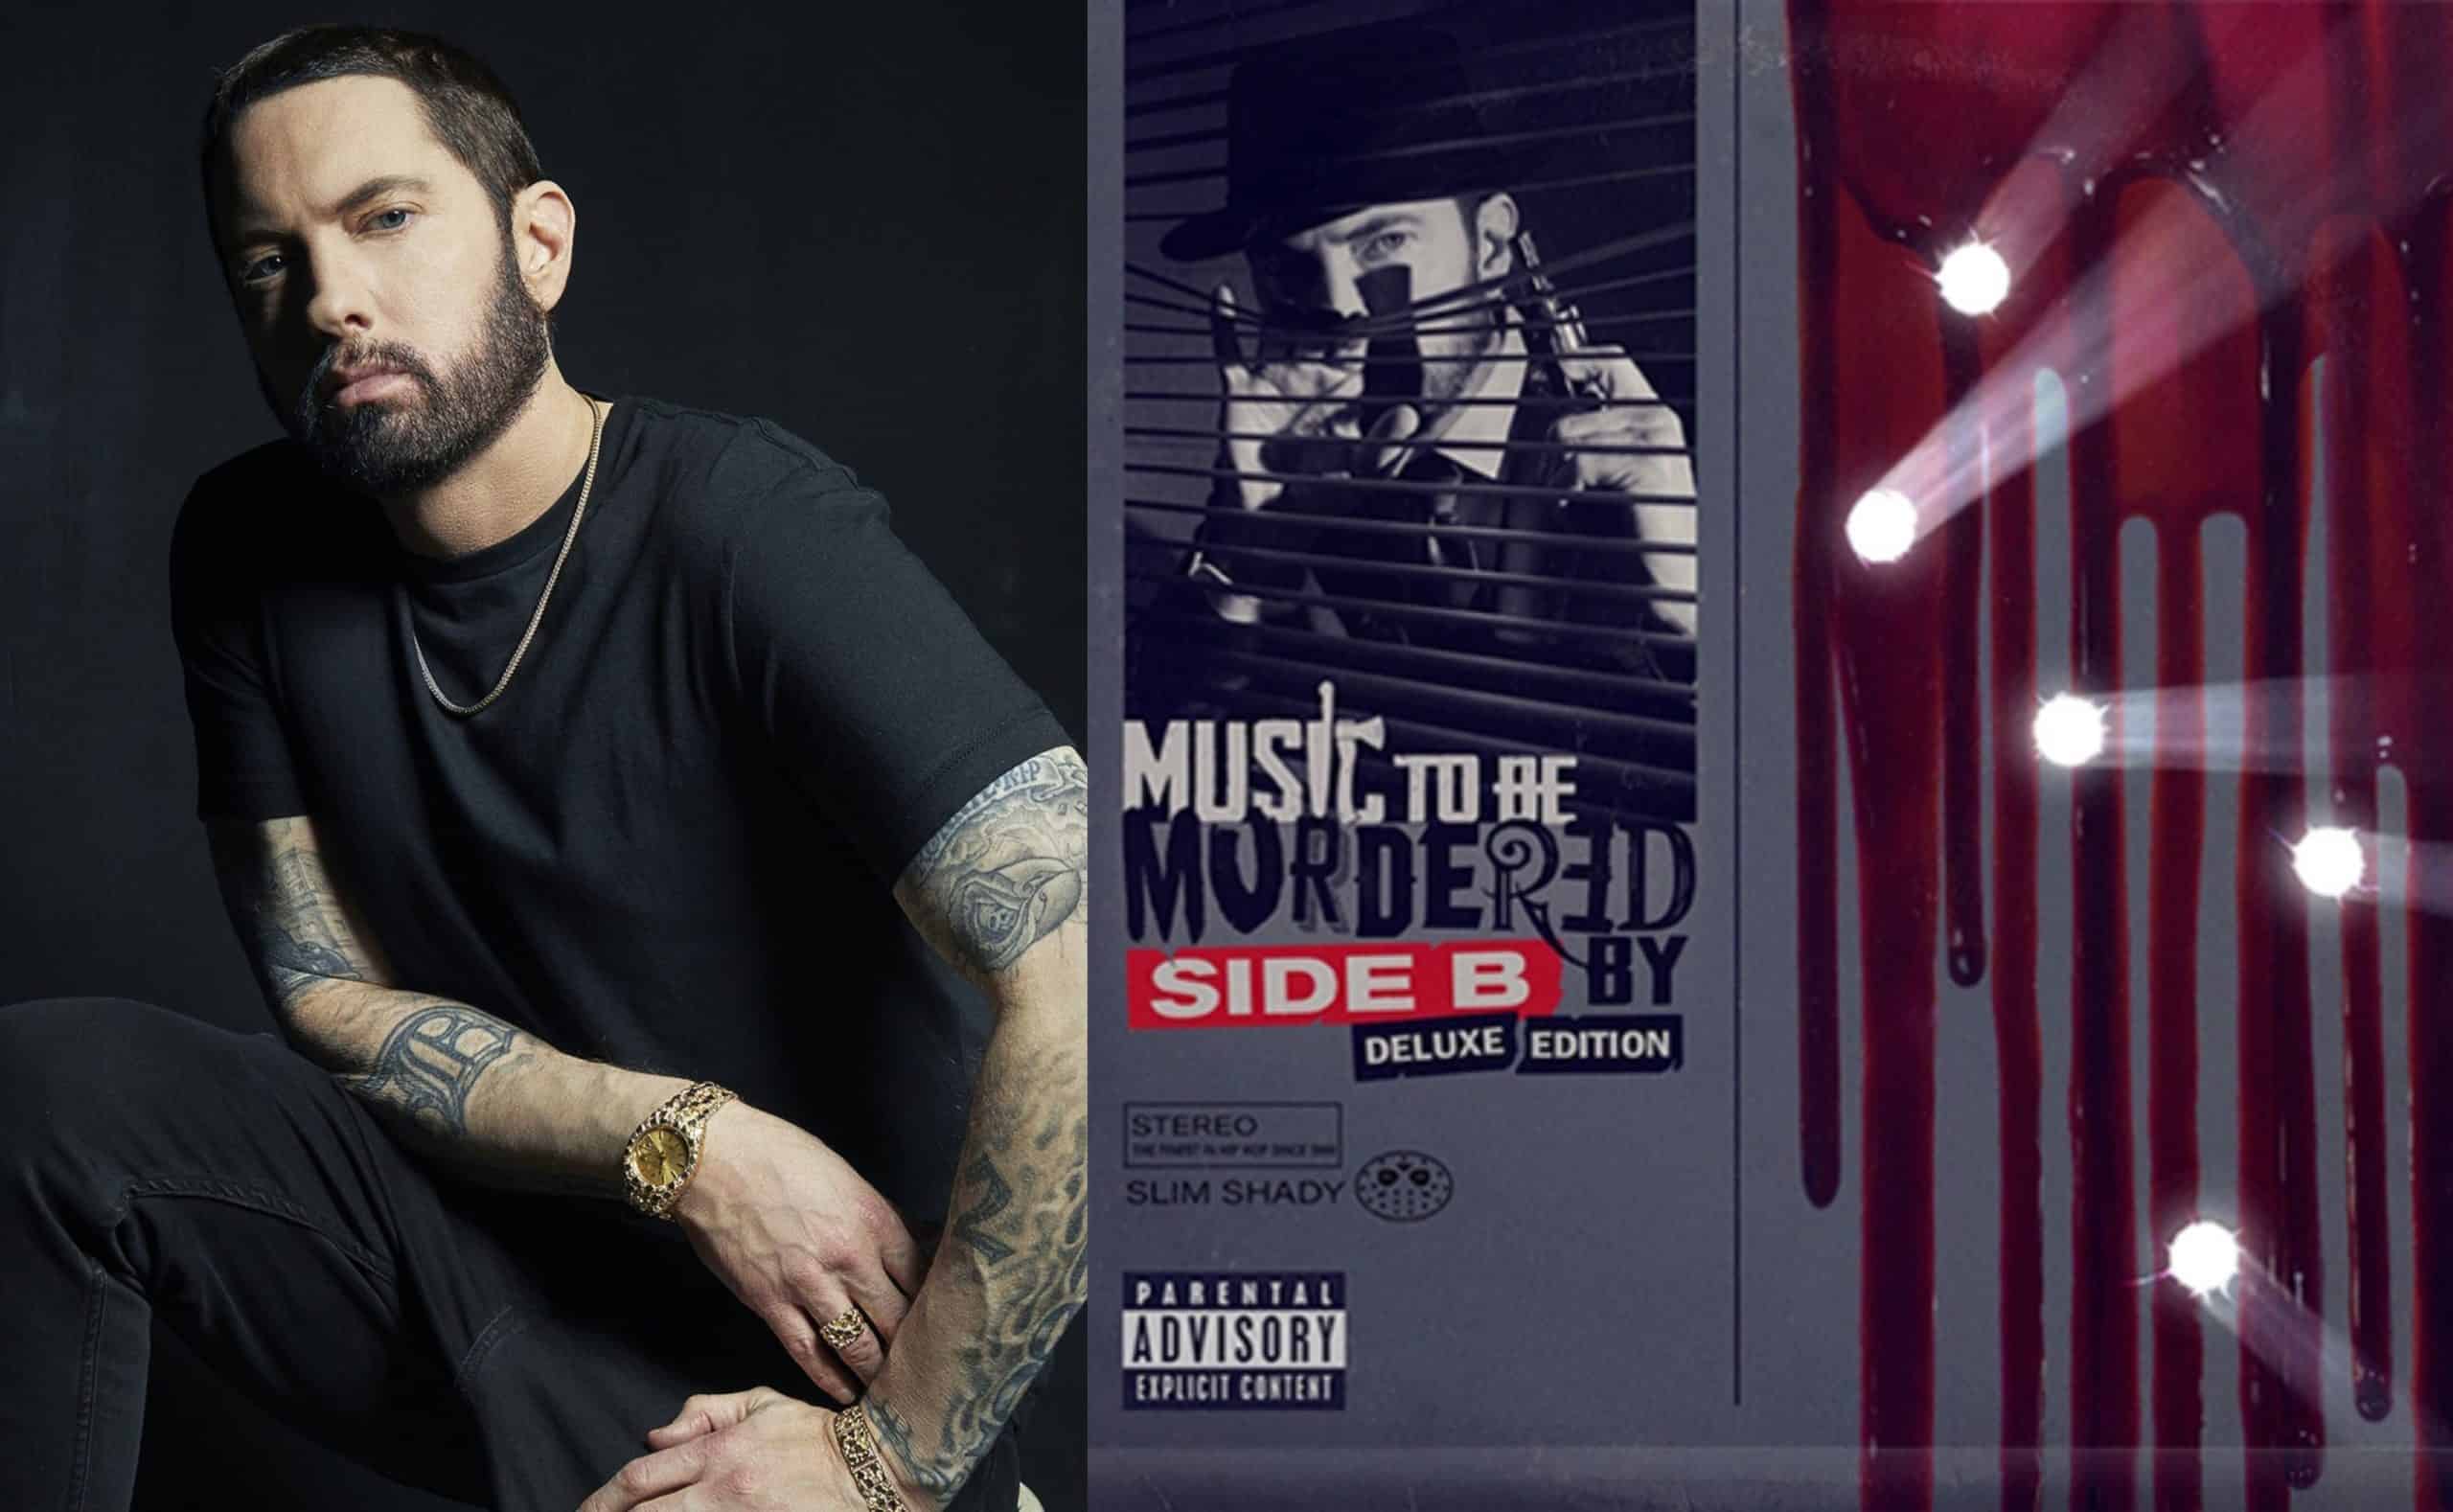 Eminem's Music To Be Murdered By - Side B Album Returns to Billboard 200 Chart